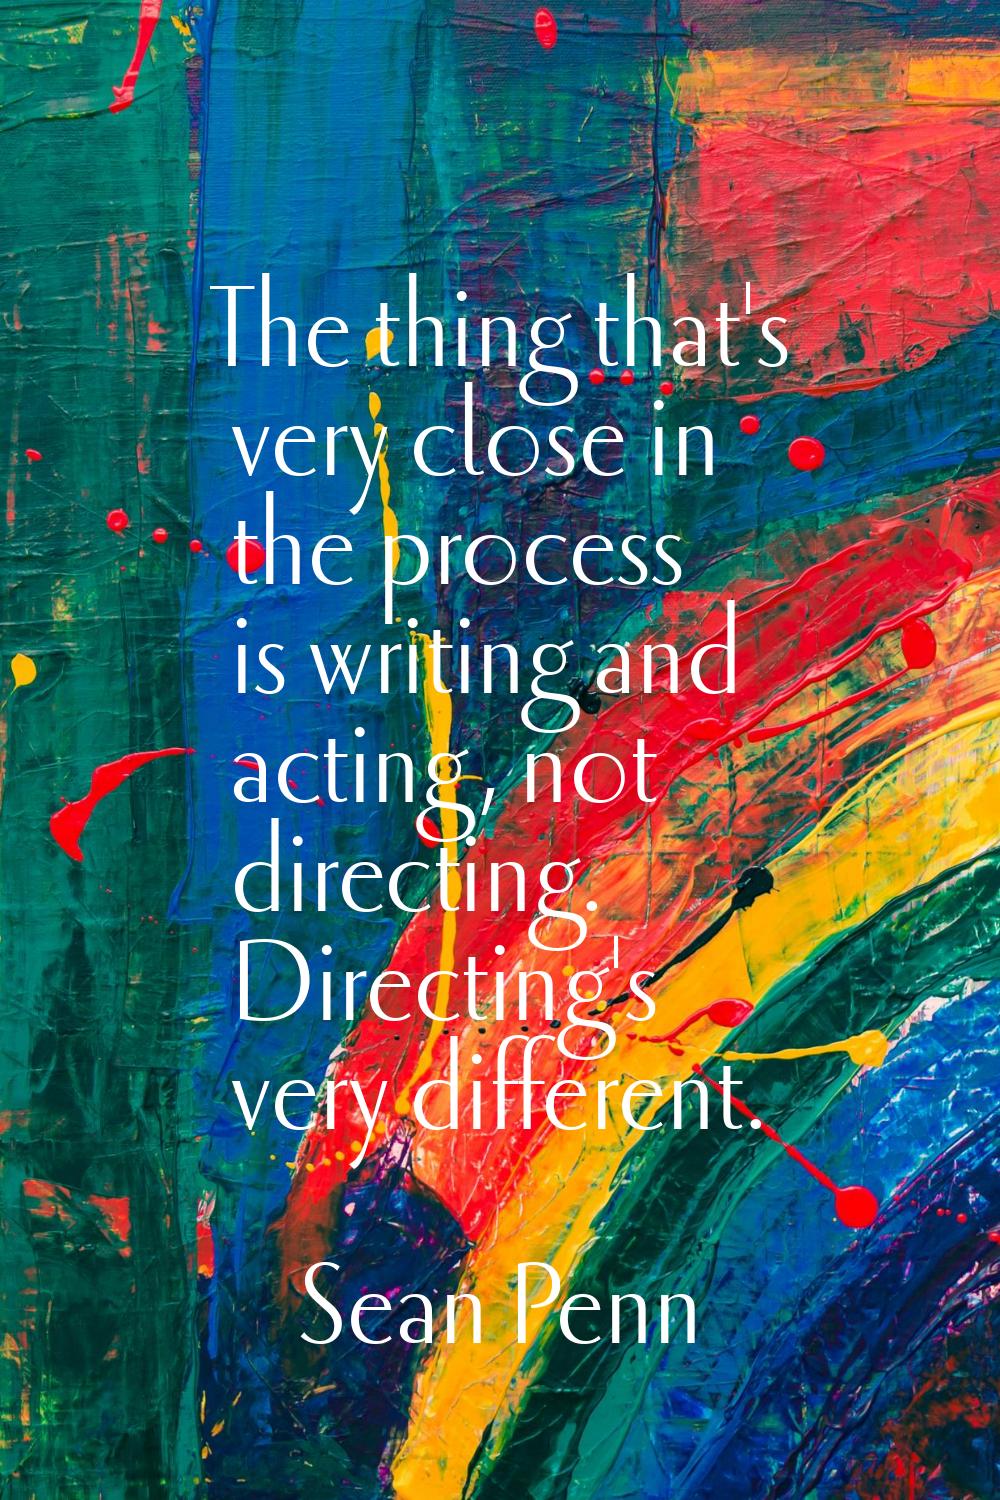 The thing that's very close in the process is writing and acting, not directing. Directing's very d